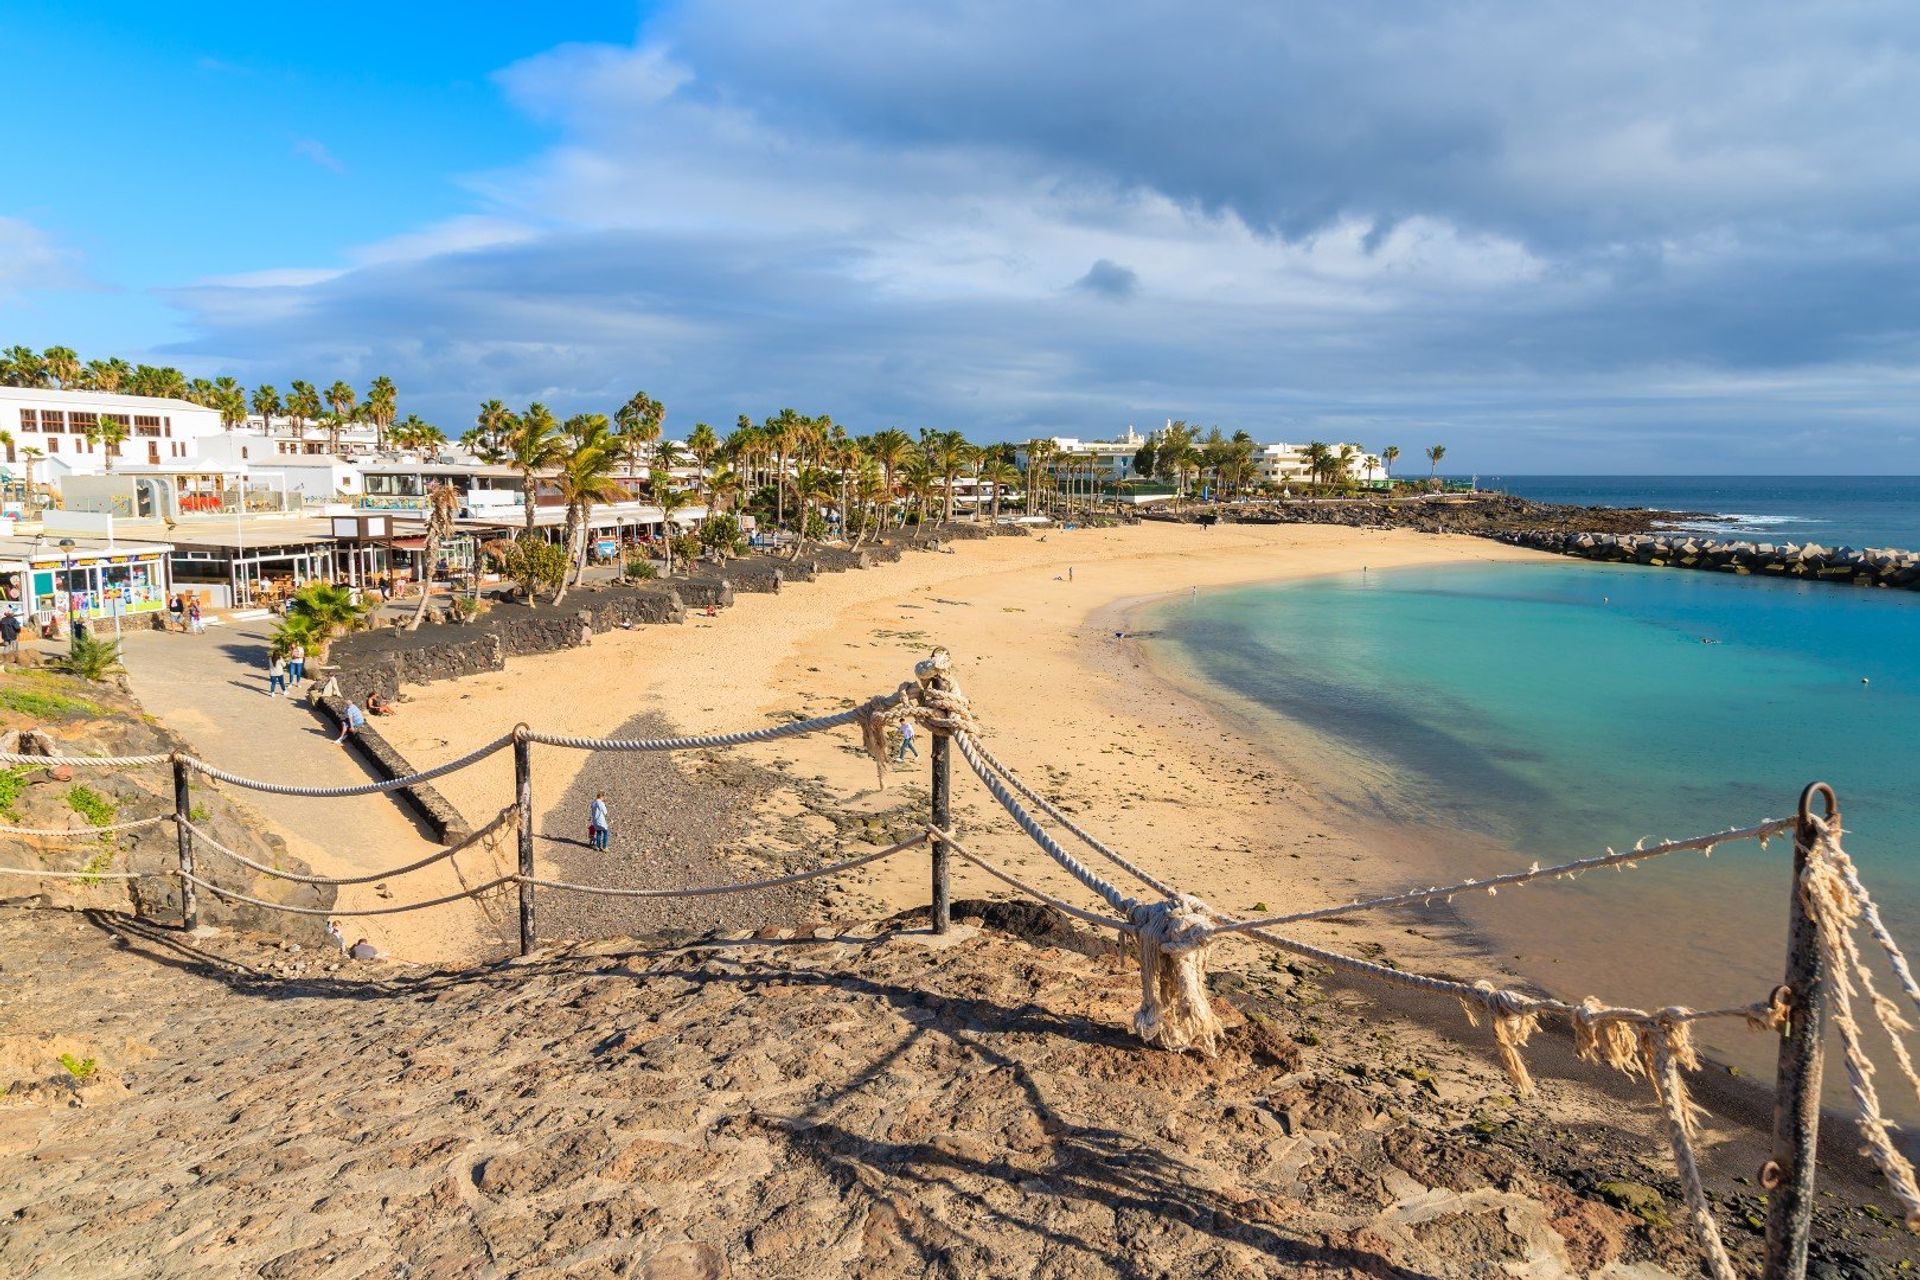 Unwind away from the busy crowds of Playa Flamingo, a few minutes' drive west of Playa Blanca